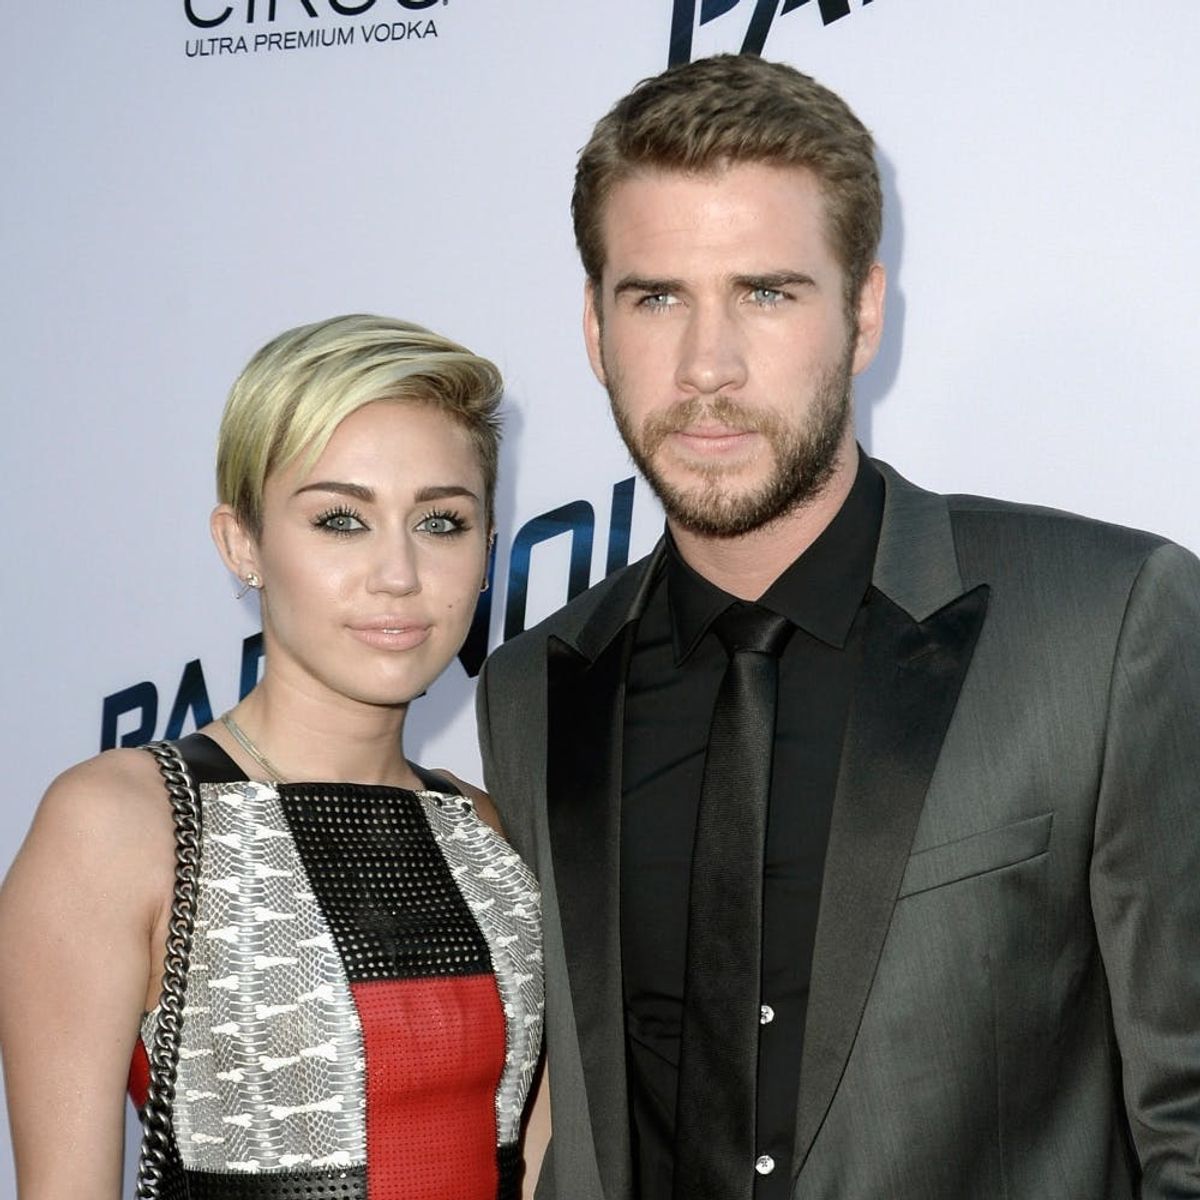 Liam Hemsworth Just Posted the Cutest #TBT With Miley Cyrus